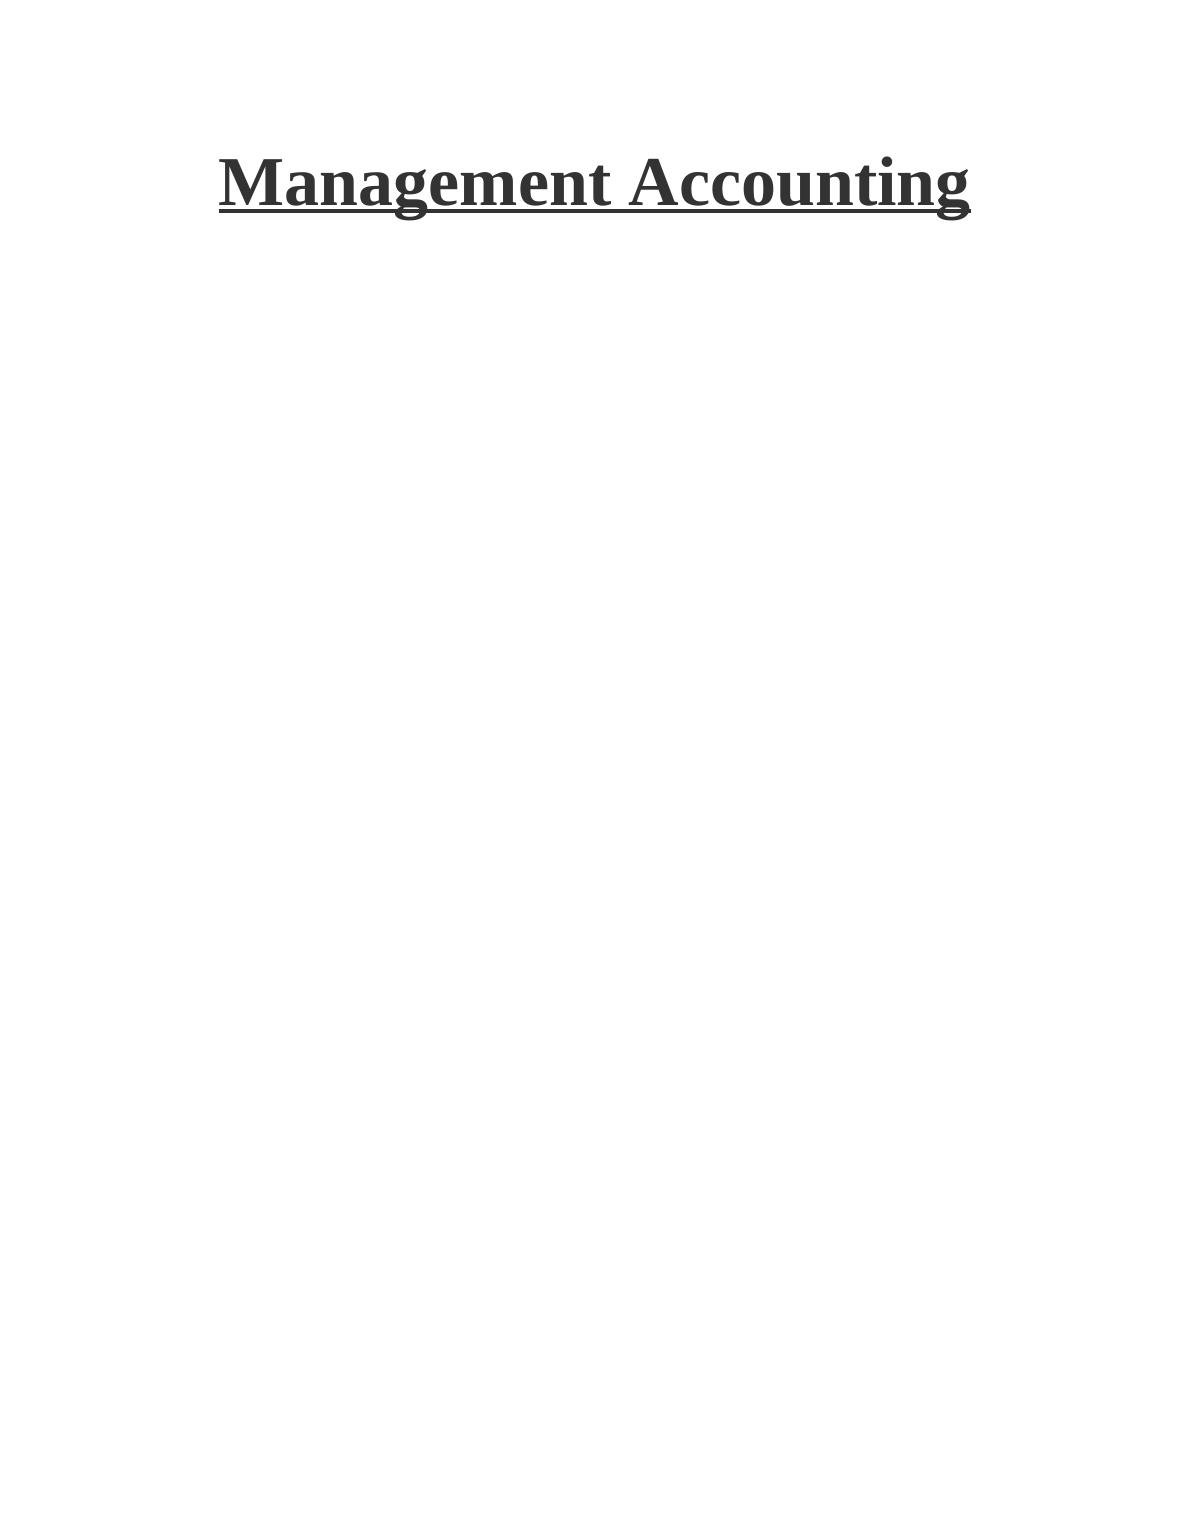 Management Accounting  -  Sample Assignment_1